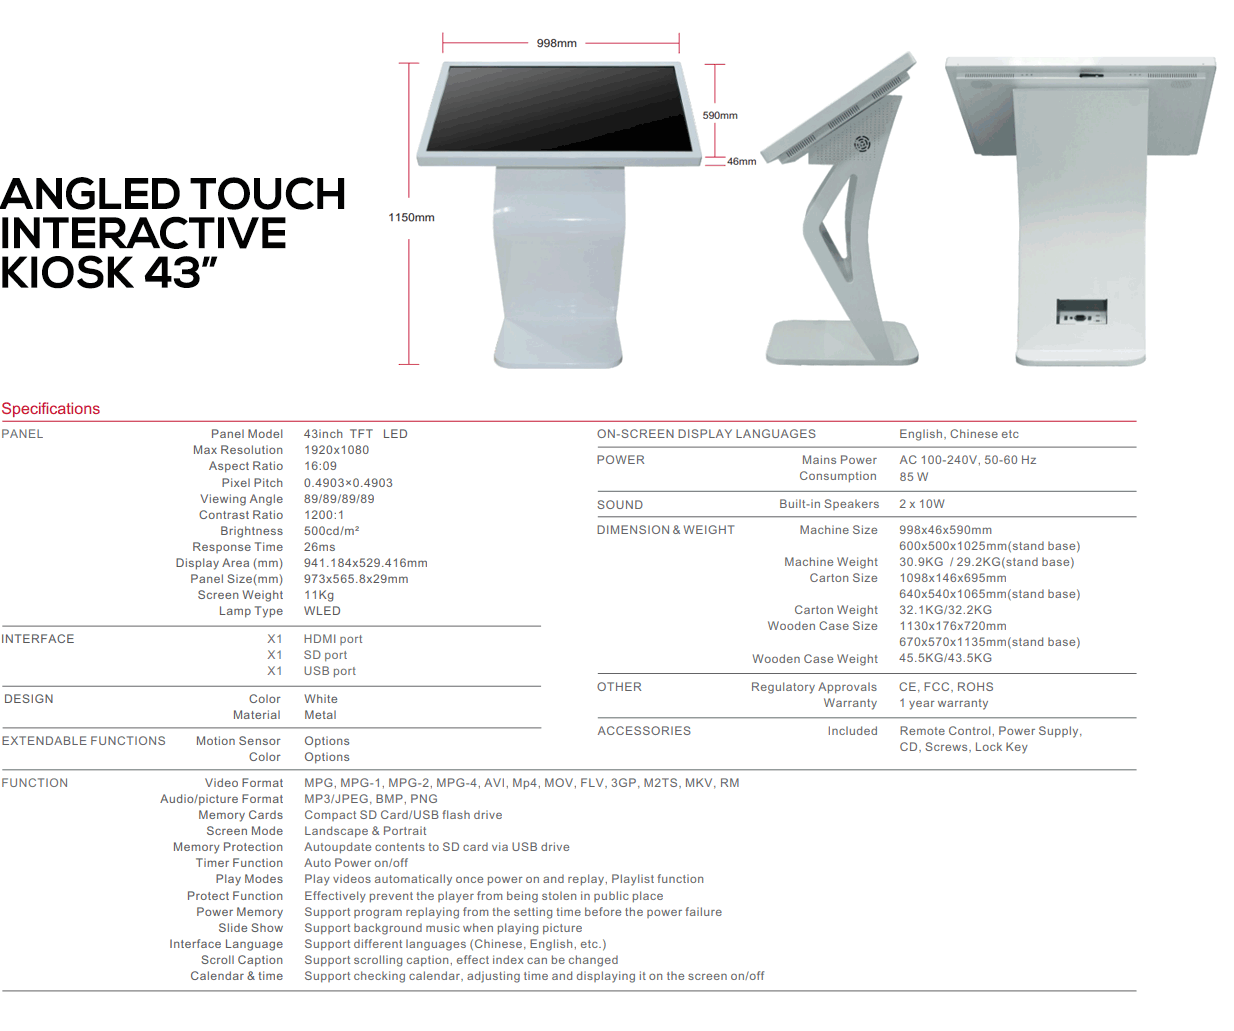 Angled Touch Interactive Kiosk - 43 inch